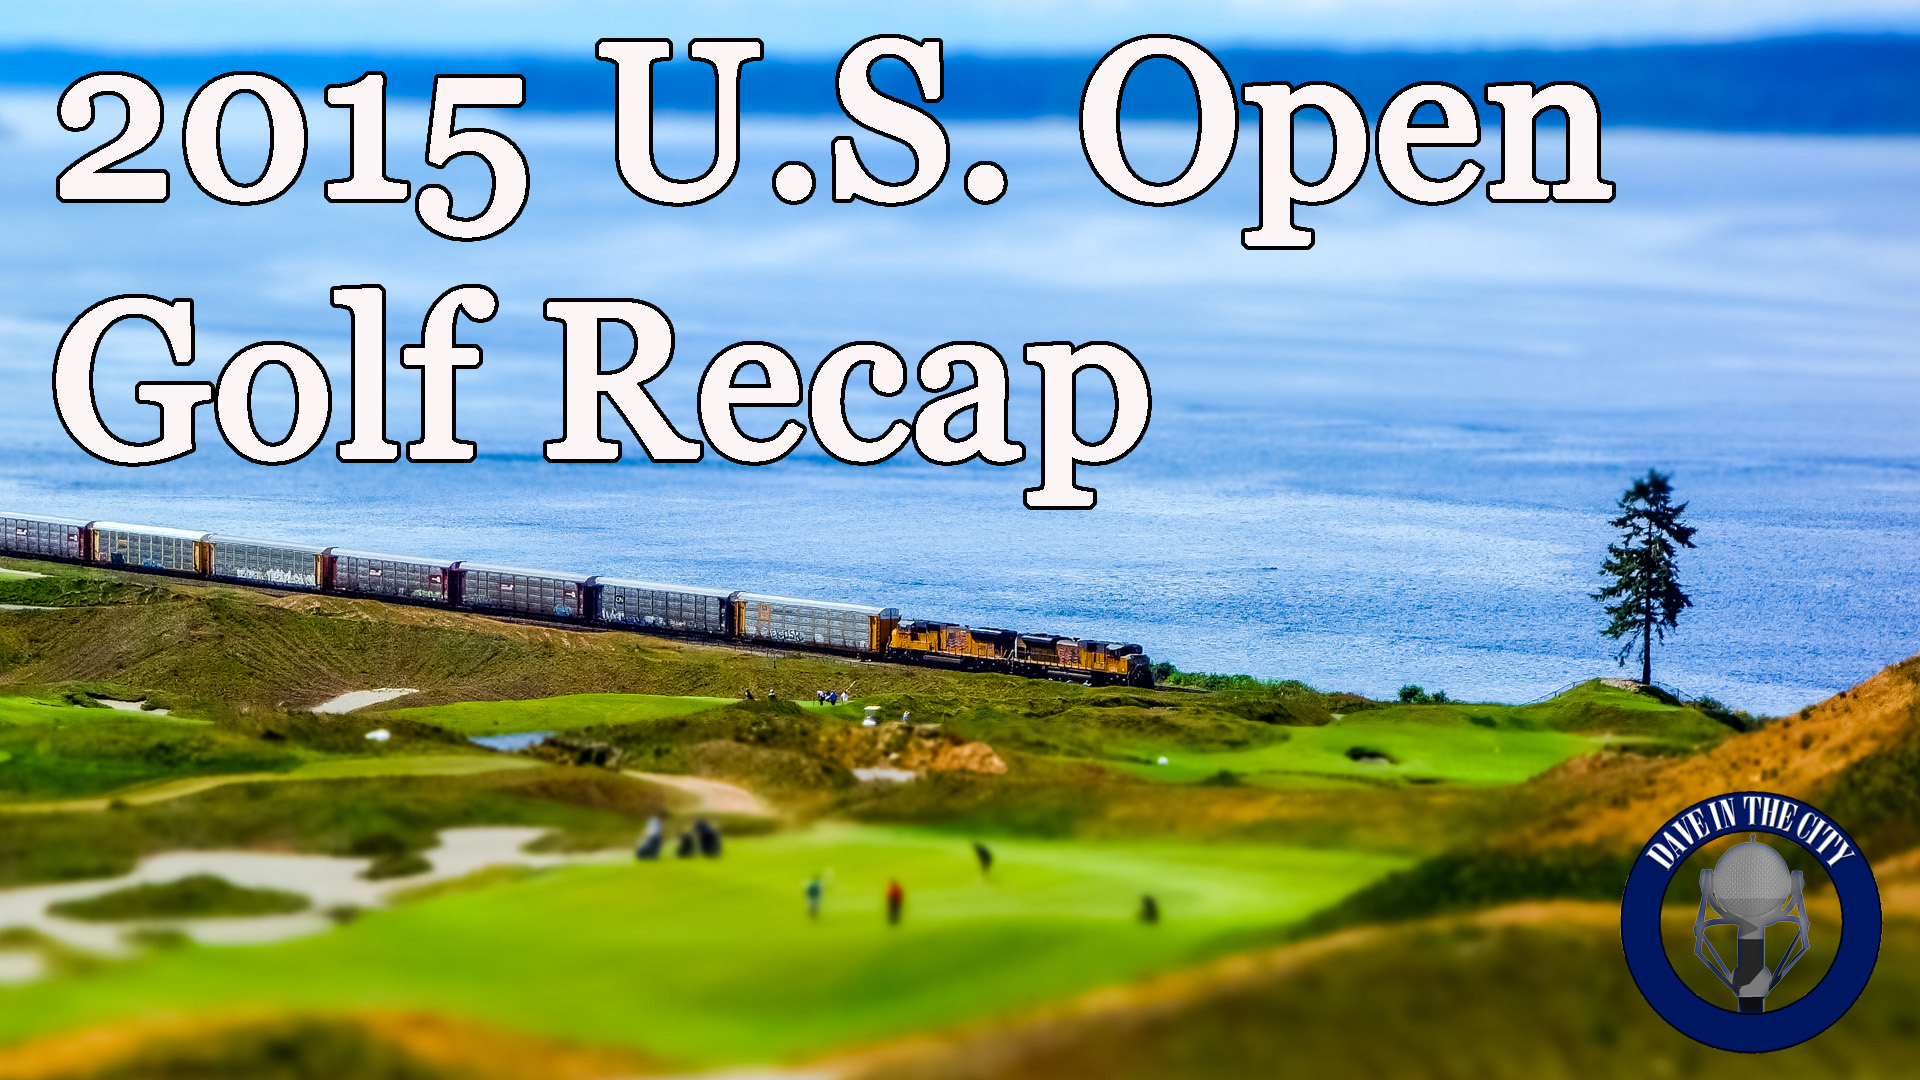 Podcast: 2015 US Open Golf Recap w/ John in CT, Mike in North NJ, & Andy in Seattle (06-24-15)